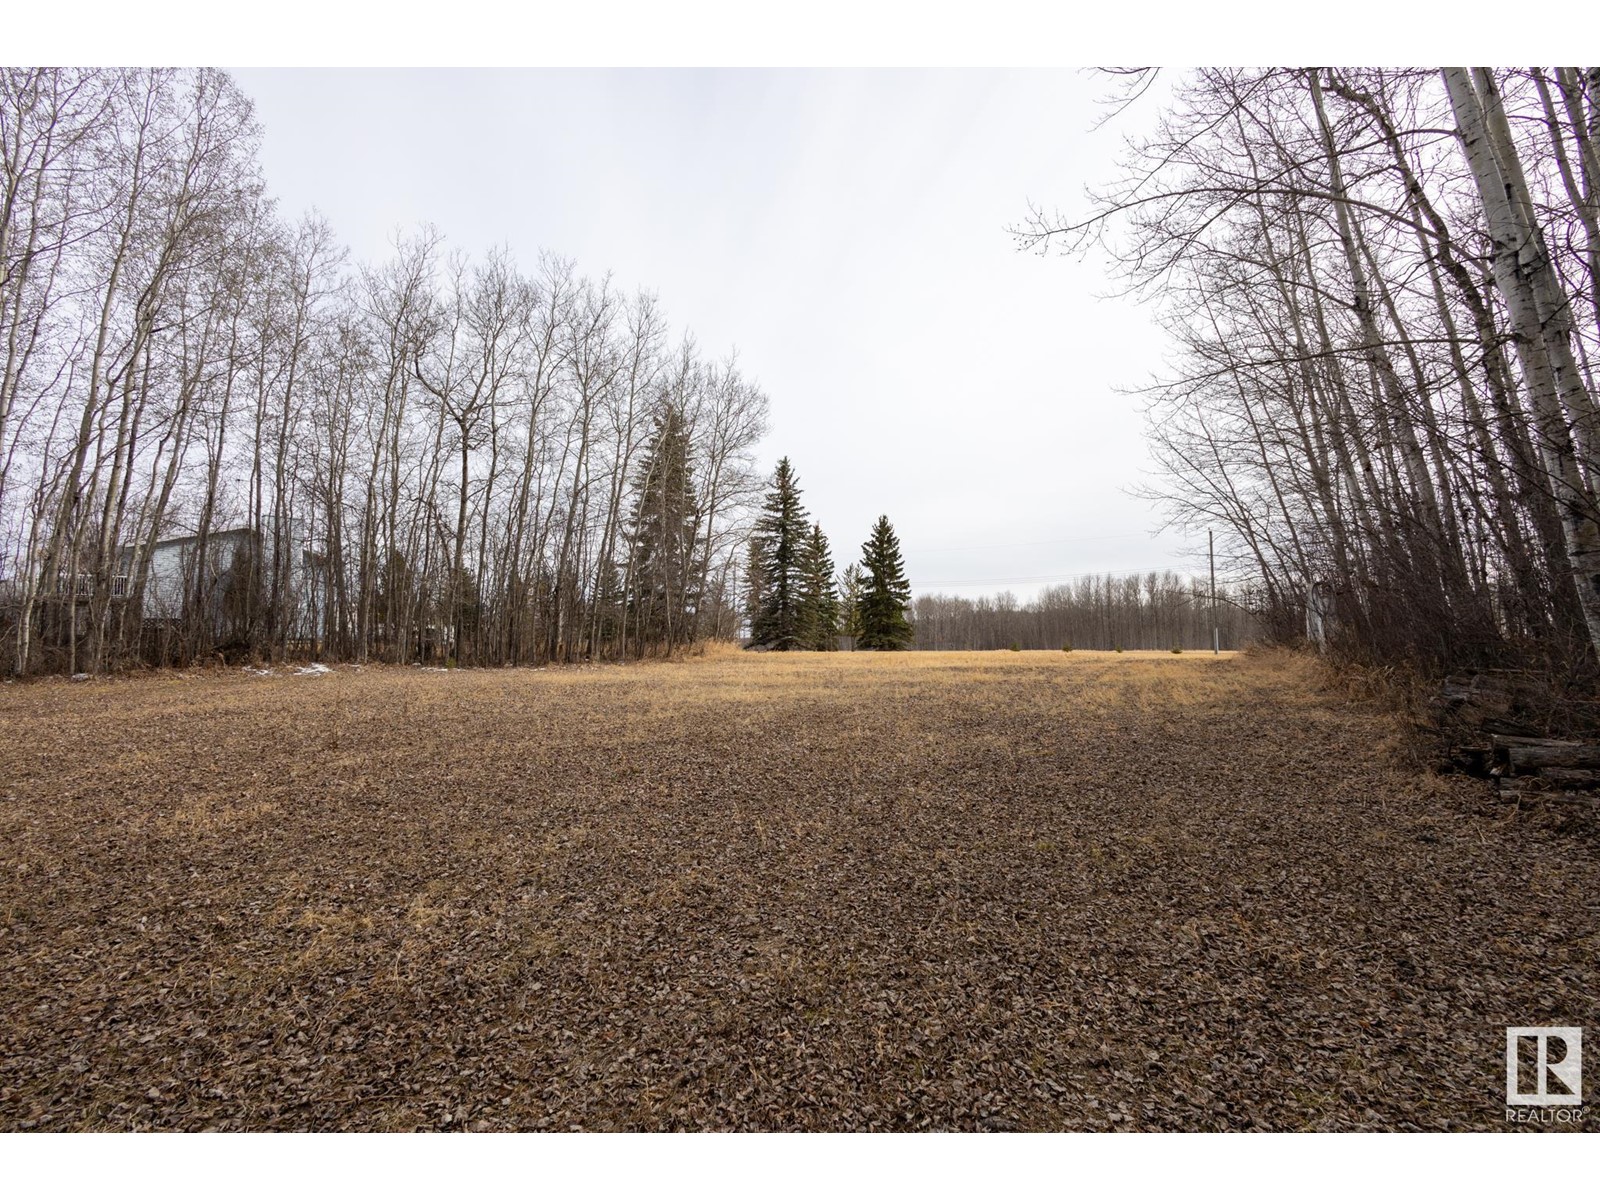 Hwy 2 Twp Road 670, Rural Athabasca County, Alberta  T9S 1A0 - Photo 25 - E4382679